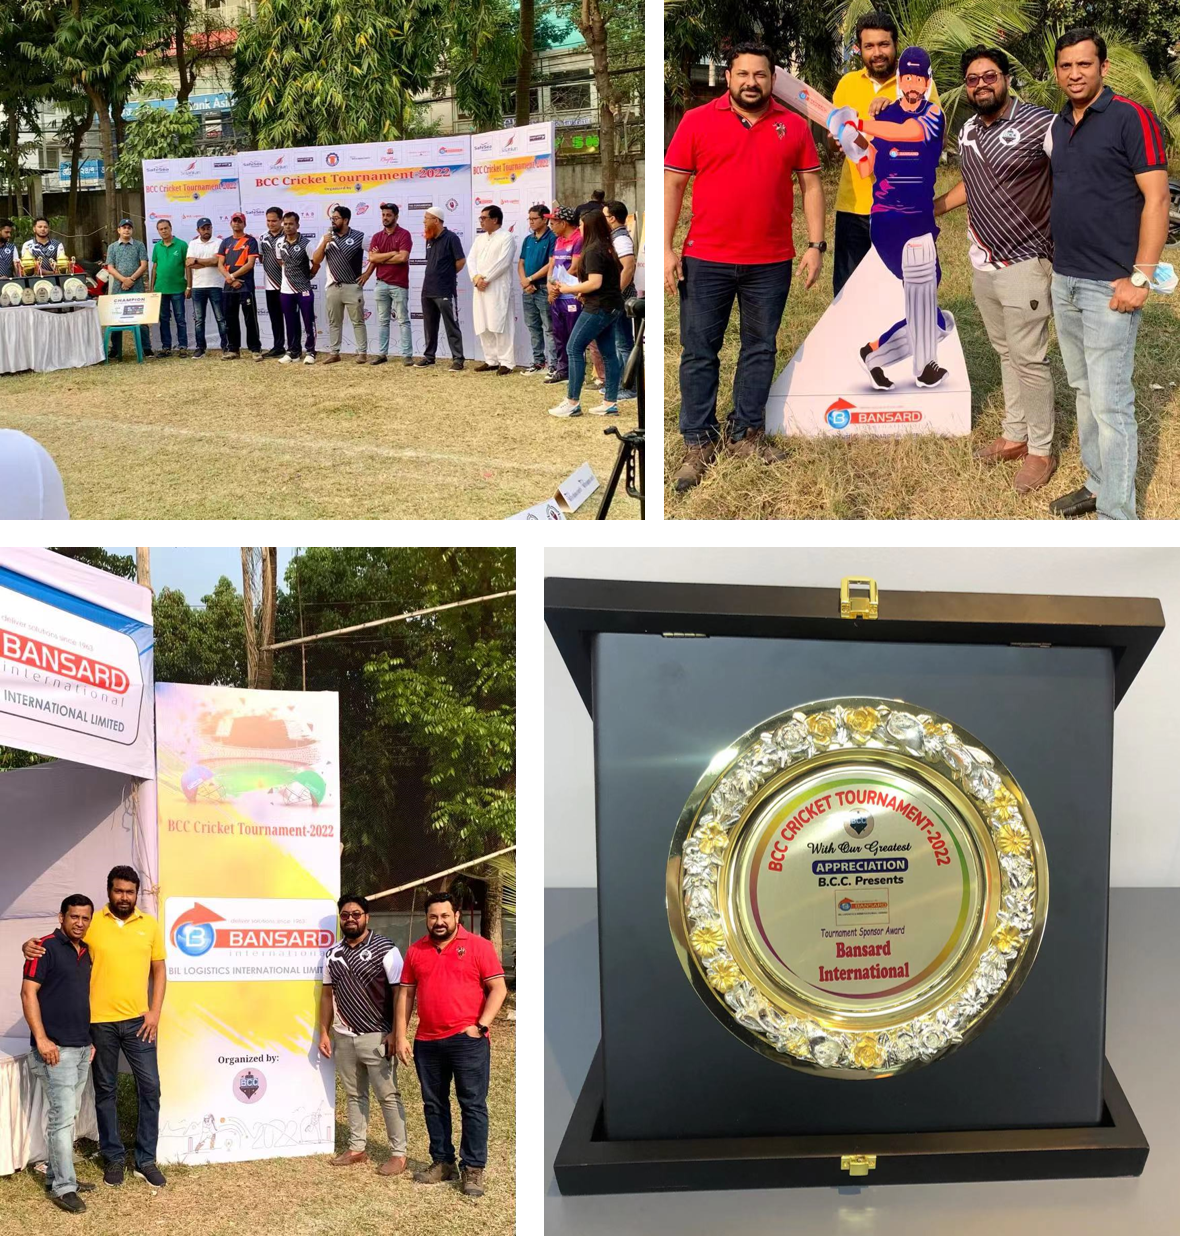 The photos of Freight Forwarders Cricket Tournament 2022 in Bangladesh